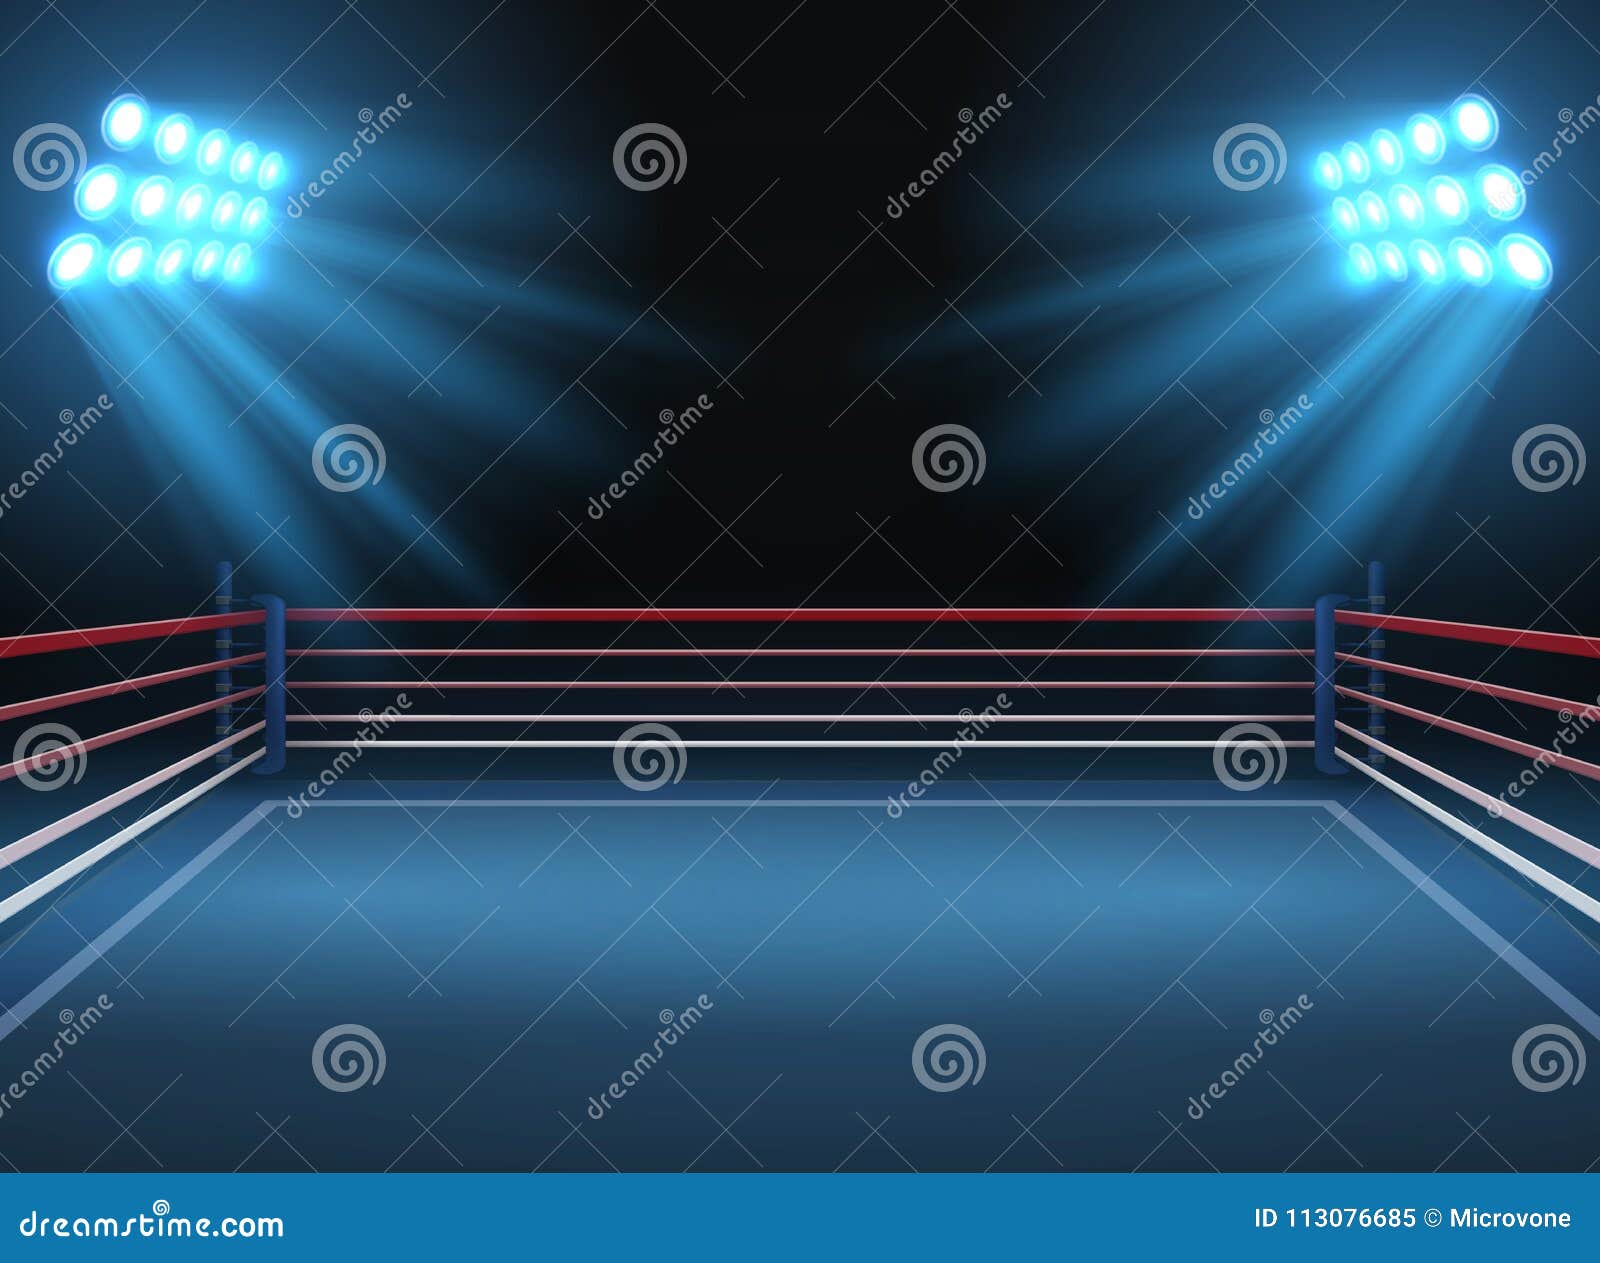 empty wrestling sport arena. boxing ring dramatic sports  background